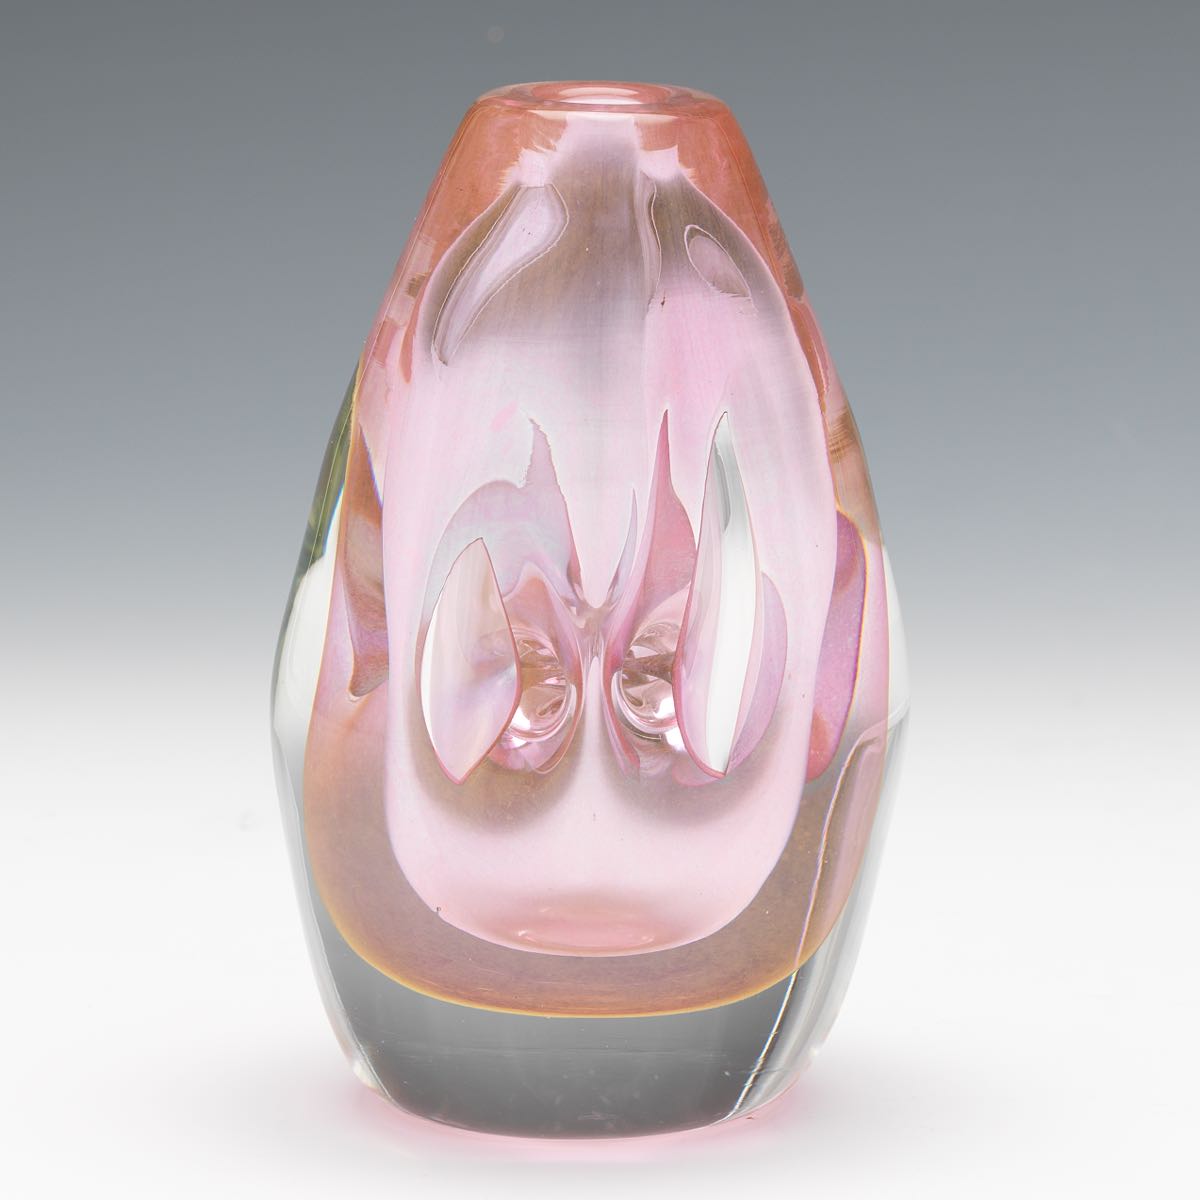 Dominick Labino (American, 1910-1987) 5-1/2" x 3-1/2"Blown glass vase in clear and colorless pink - Image 5 of 8